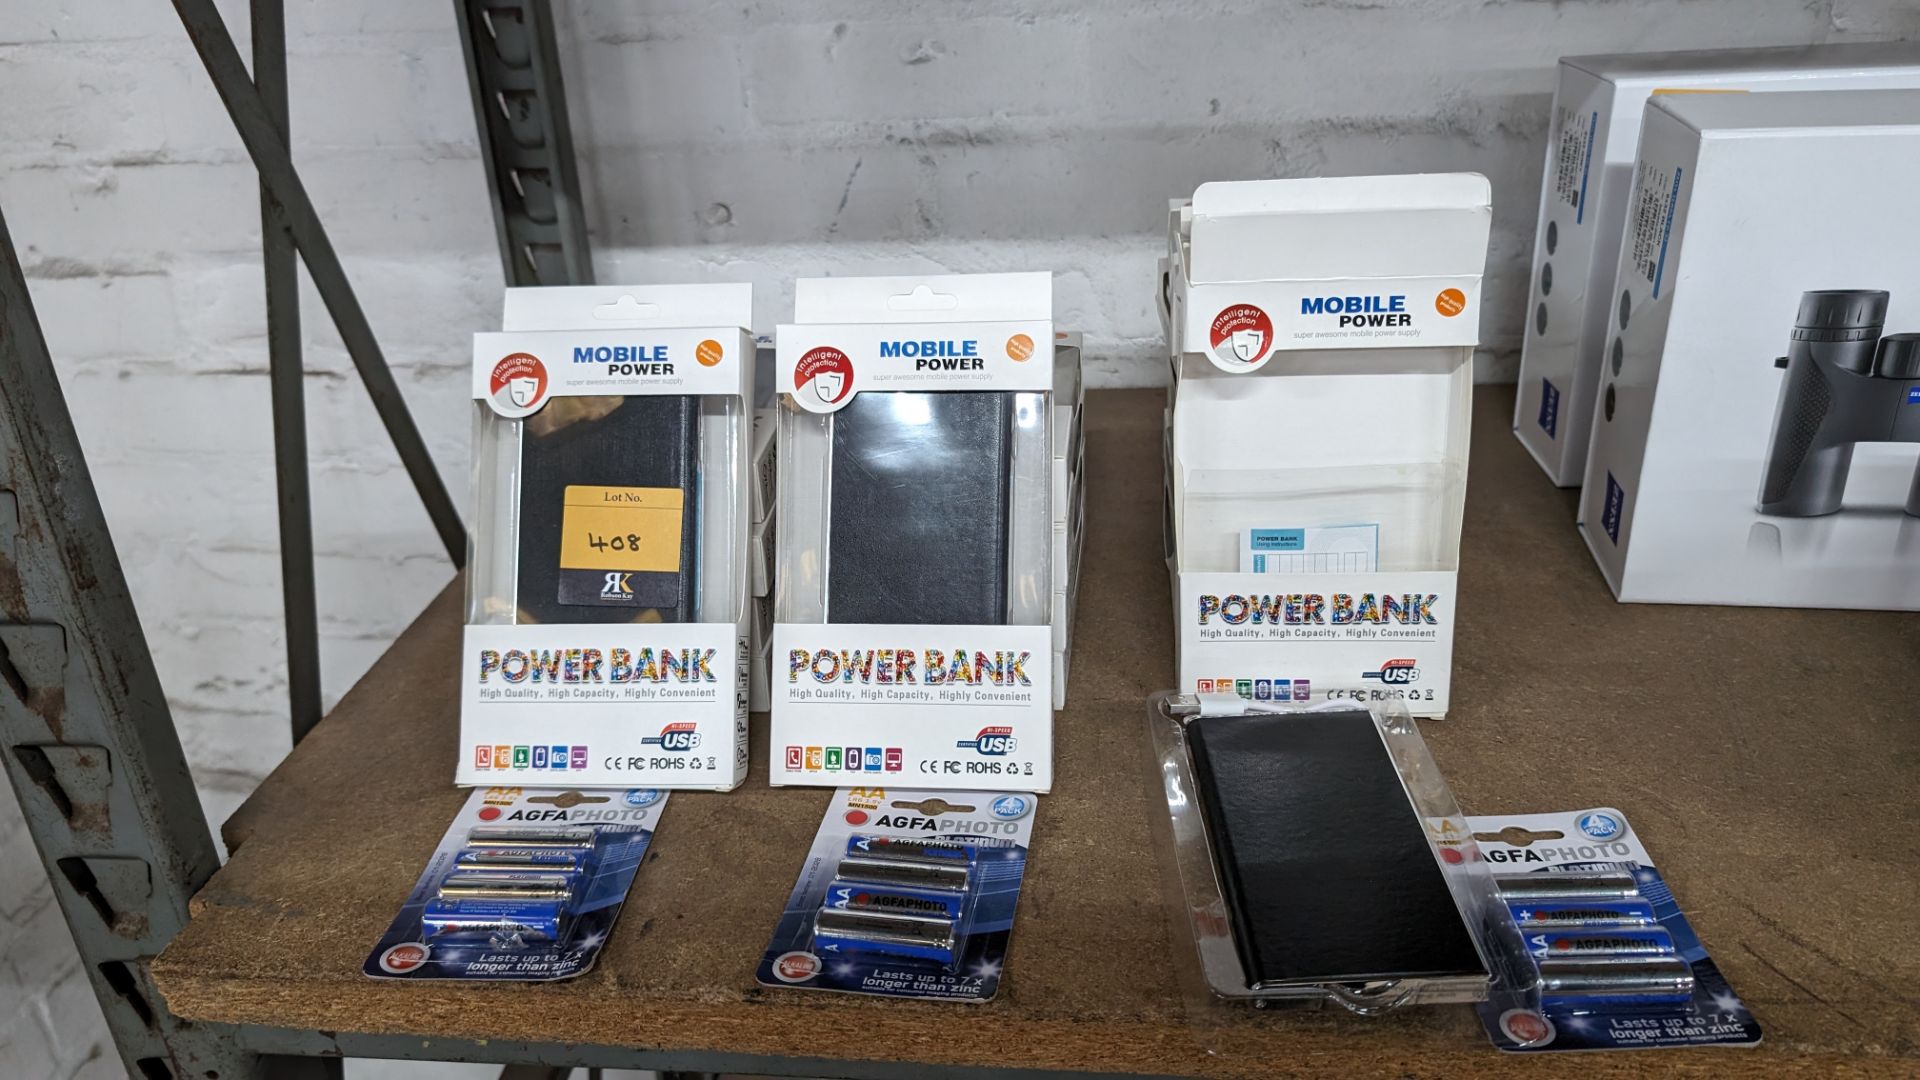 17 off mobile power banks plus 3 packs of batteries - Image 2 of 10